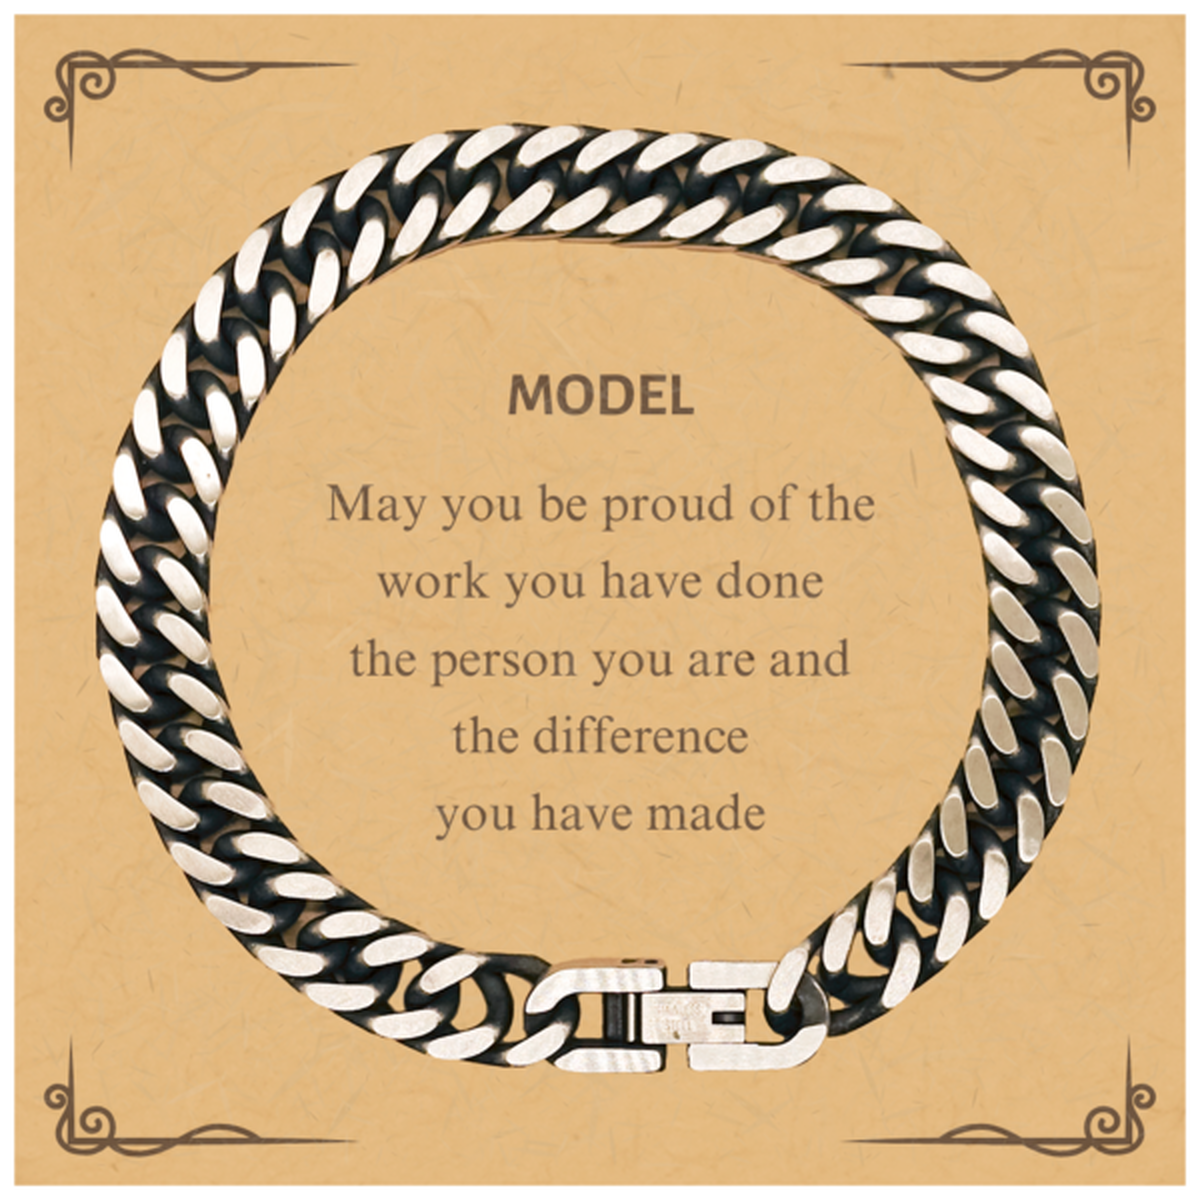 Model May you be proud of the work you have done, Retirement Model Cuban Link Chain Bracelet for Colleague Appreciation Gifts Amazing for Model